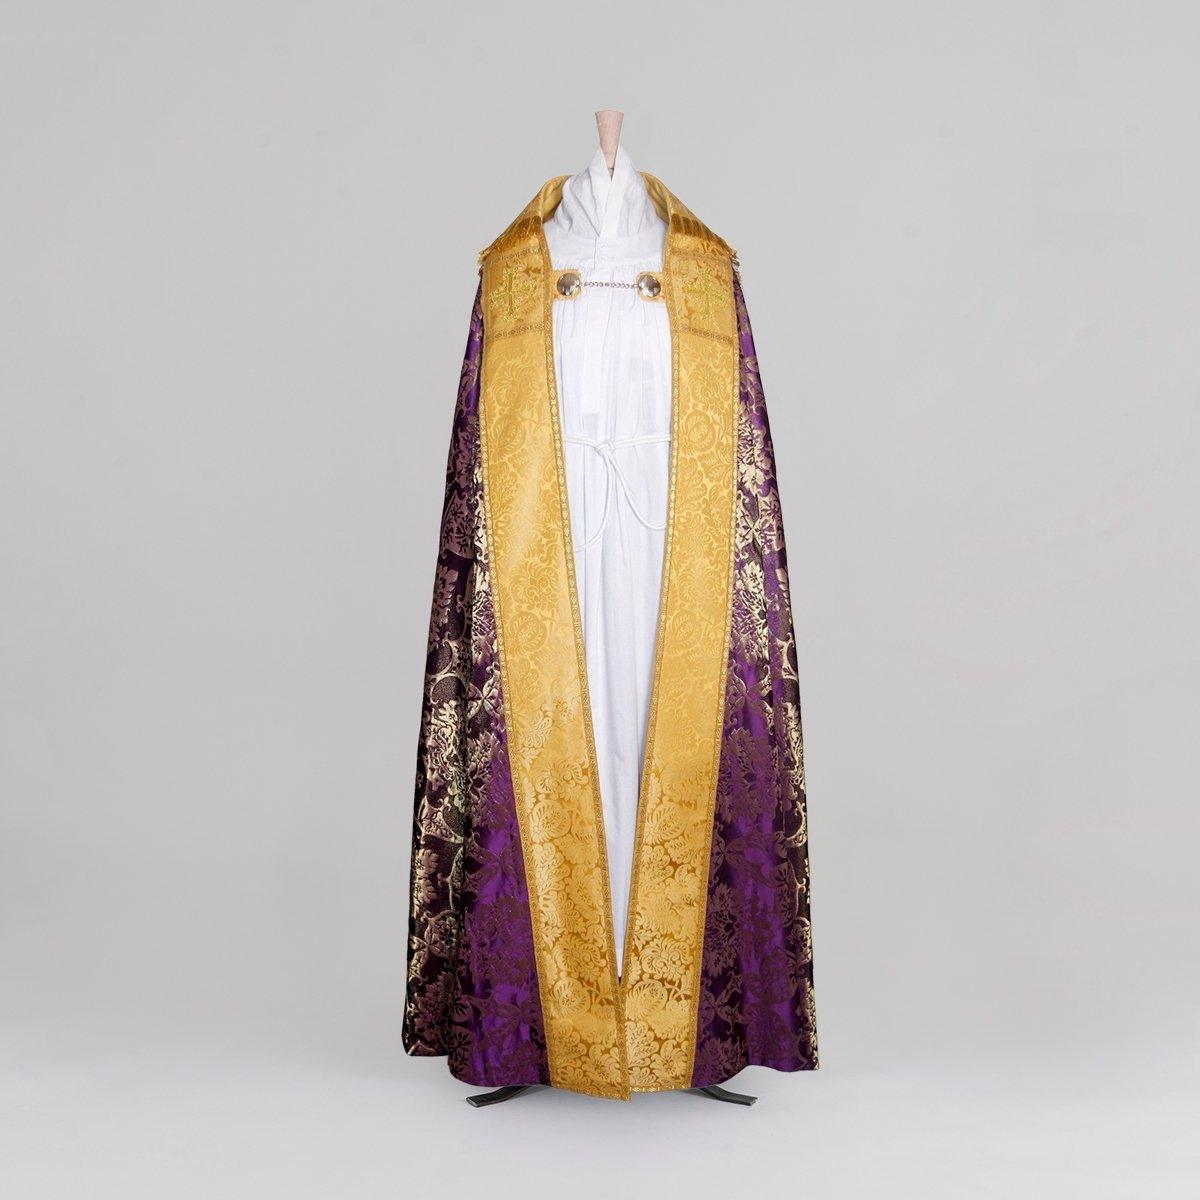 Embroidered Cathedral Cope in Royal Purple/Gilt Gothic with Cream/Gold Holbein Orphreys - Watts & Co.